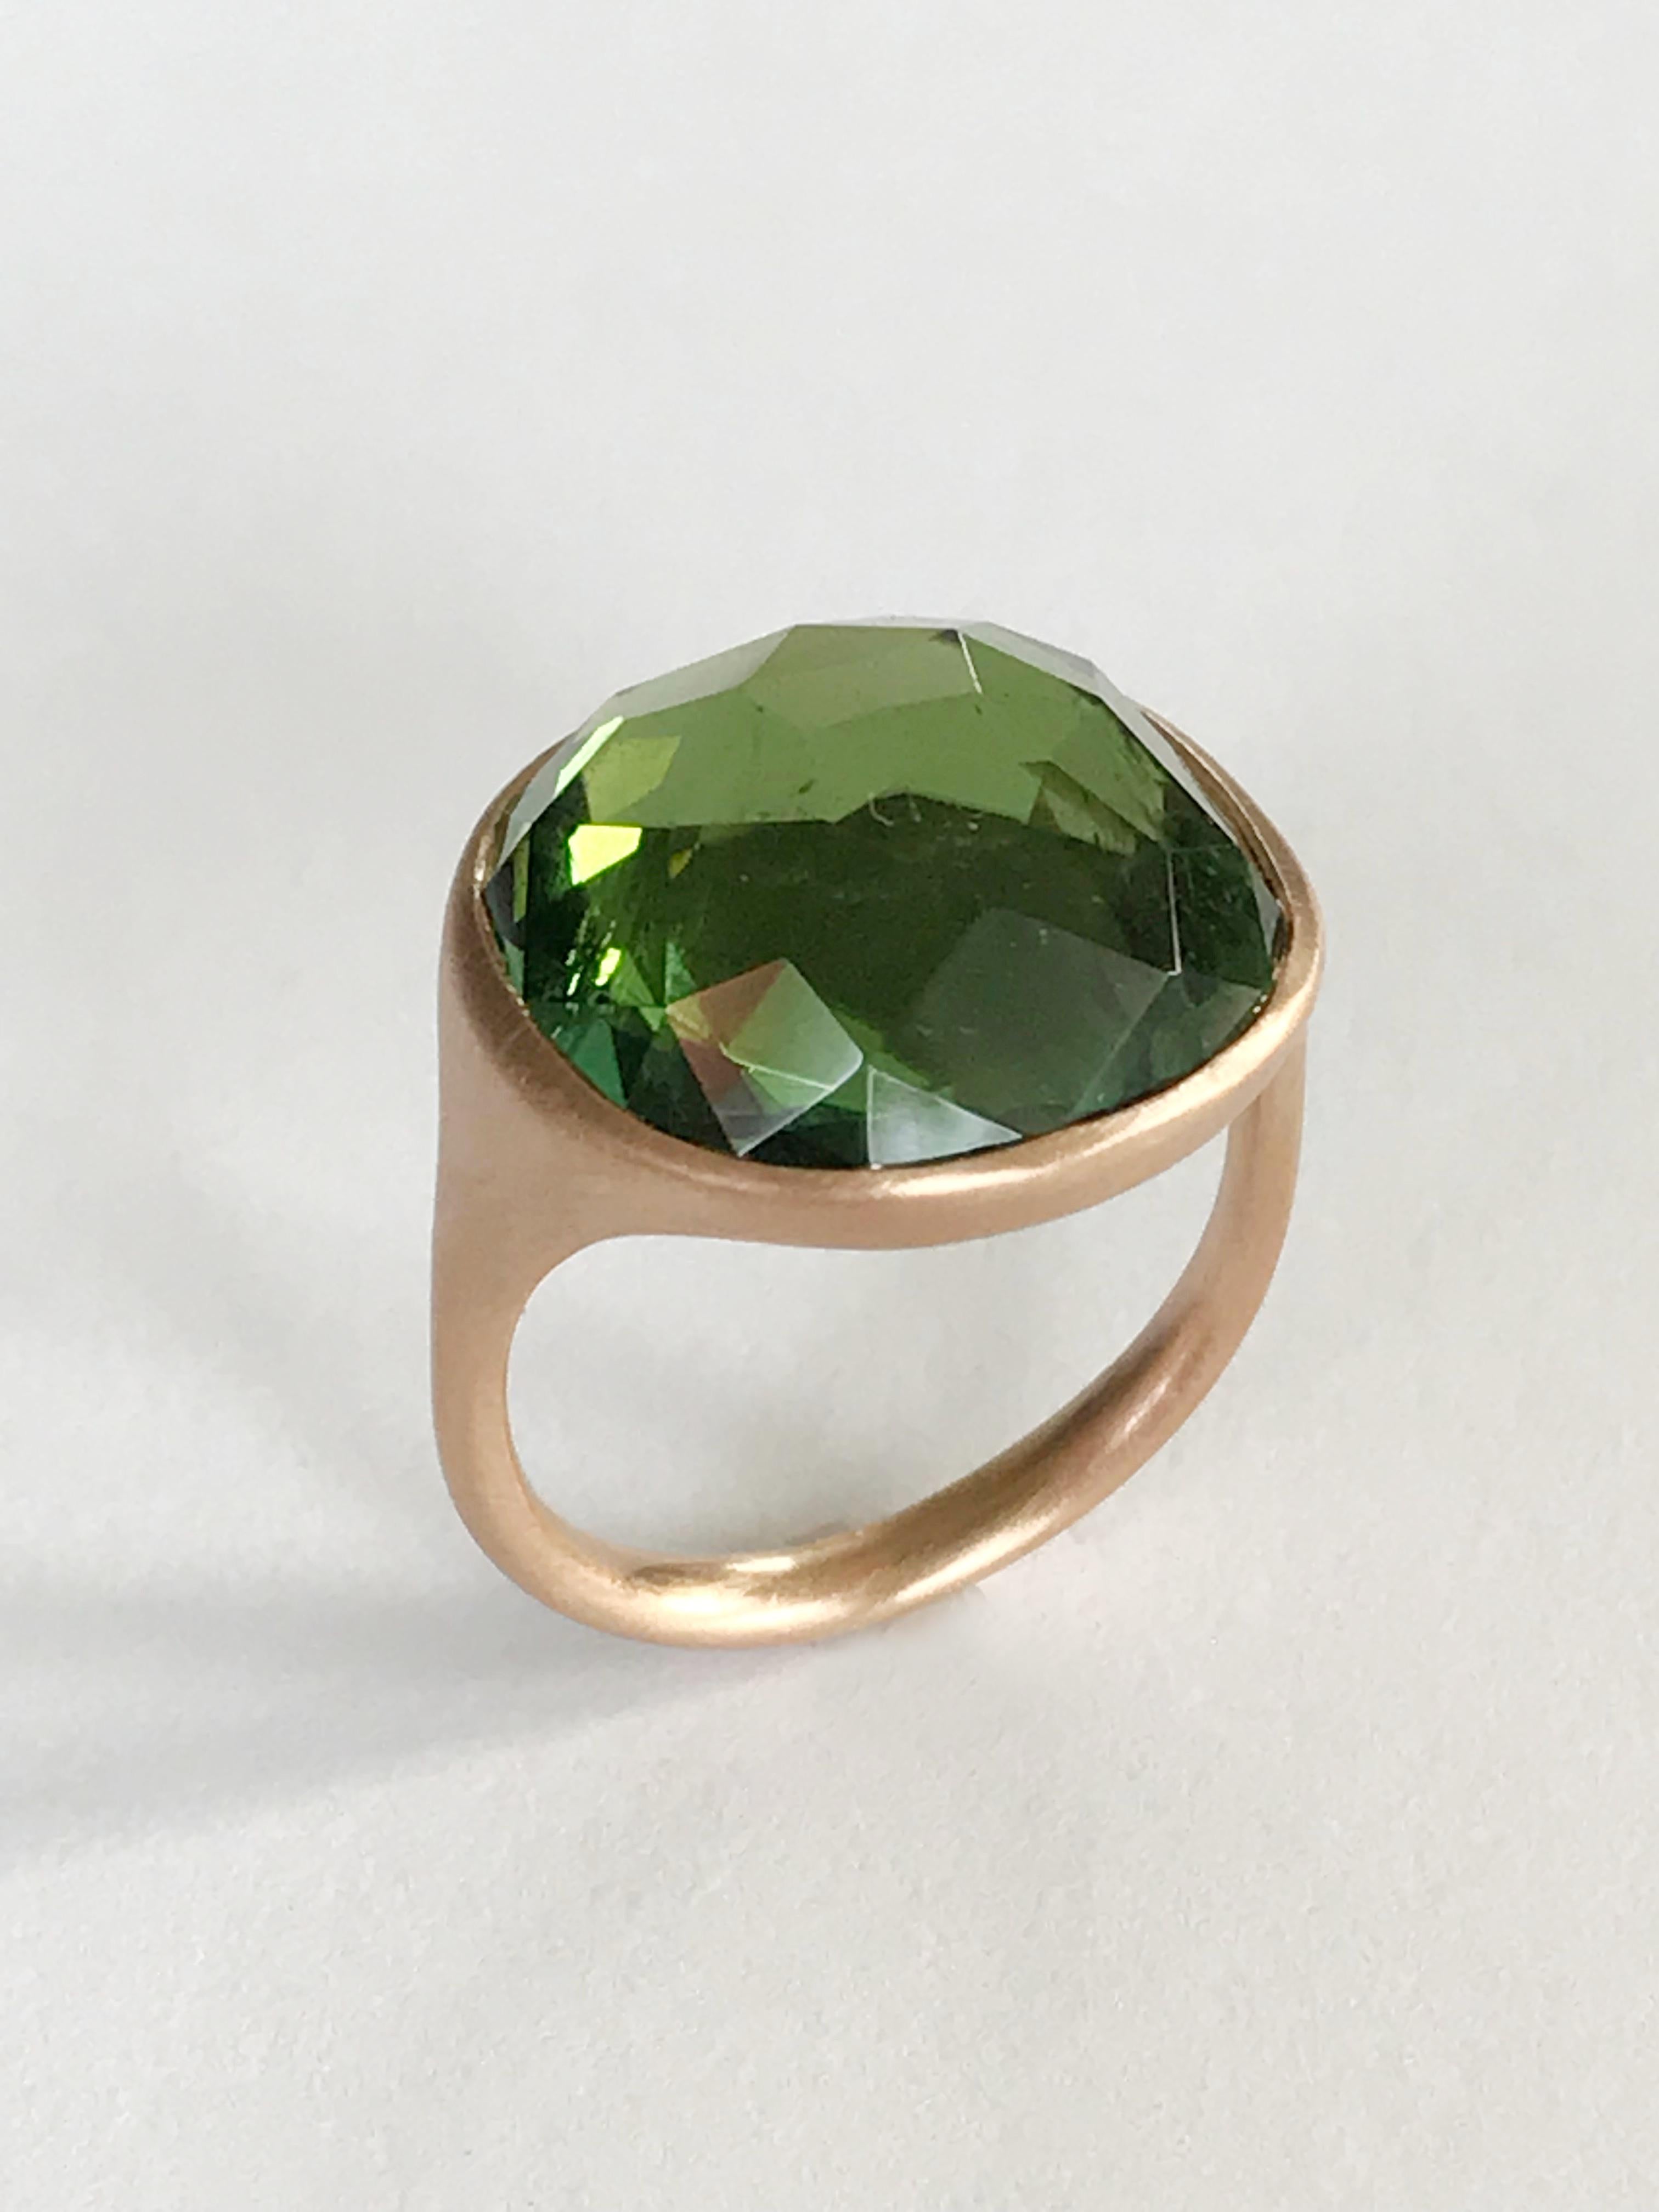 One of a Kind 18k rose gold matte finishing ring with a 13,4 carat bezel-set cushion cut faceted green Tourmaline.  
Ring size 7 1/4 - EU 55 re-sizable to most finger sizes.  
Bezel stone dimensions : width 18,2 mm height 16,9 mm.
The ring is